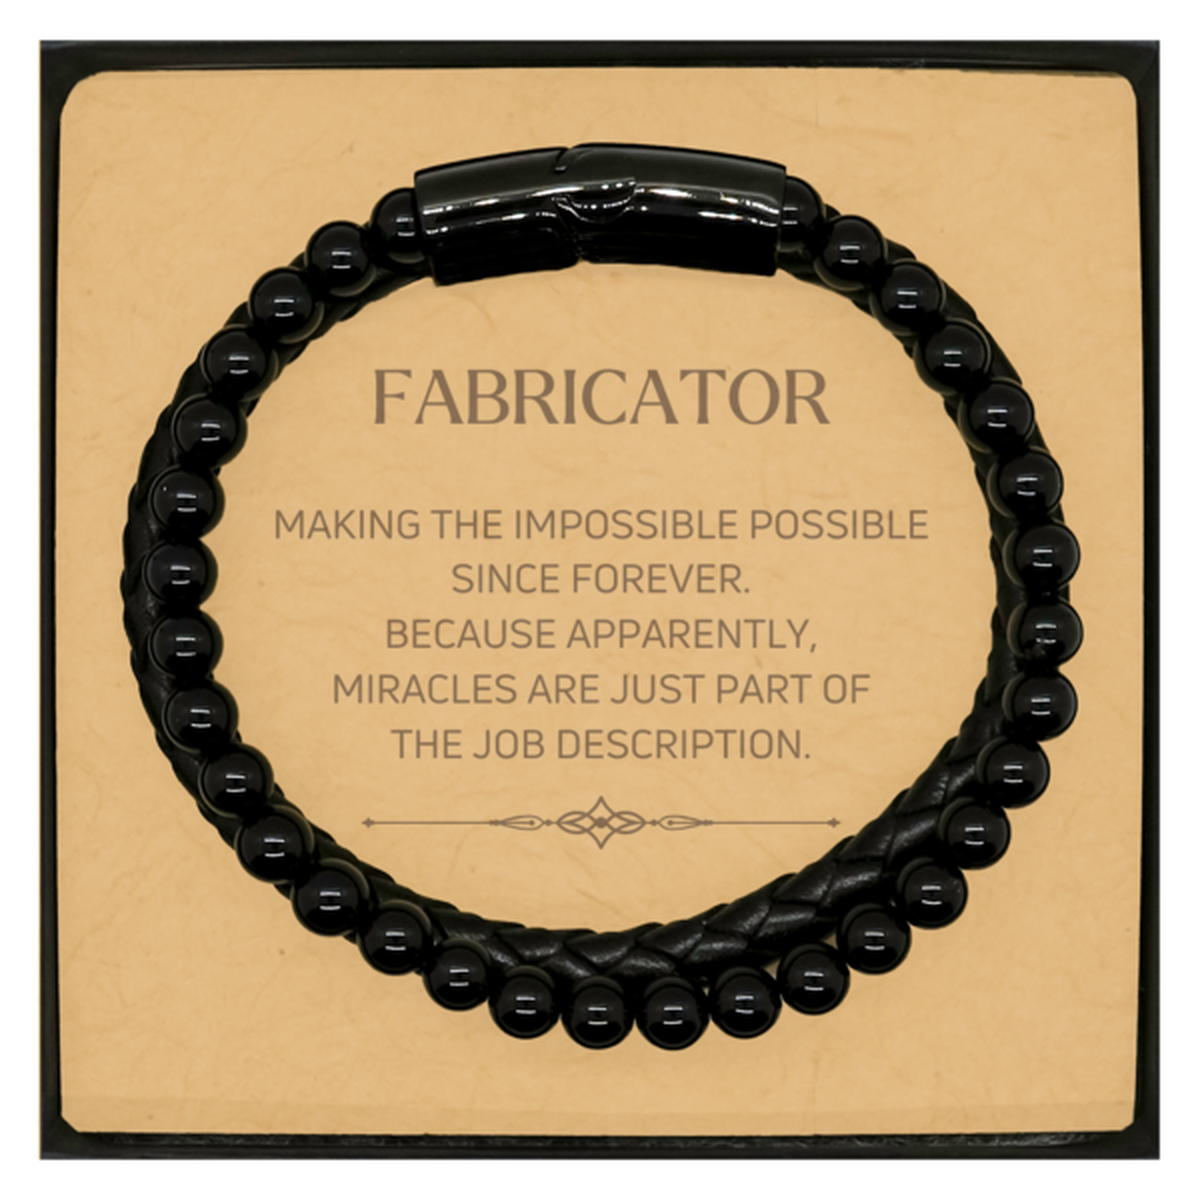 Funny Fabricator Gifts, Miracles are just part of the job description, Inspirational Birthday Christmas Stone Leather Bracelets For Fabricator, Men, Women, Coworkers, Friends, Boss